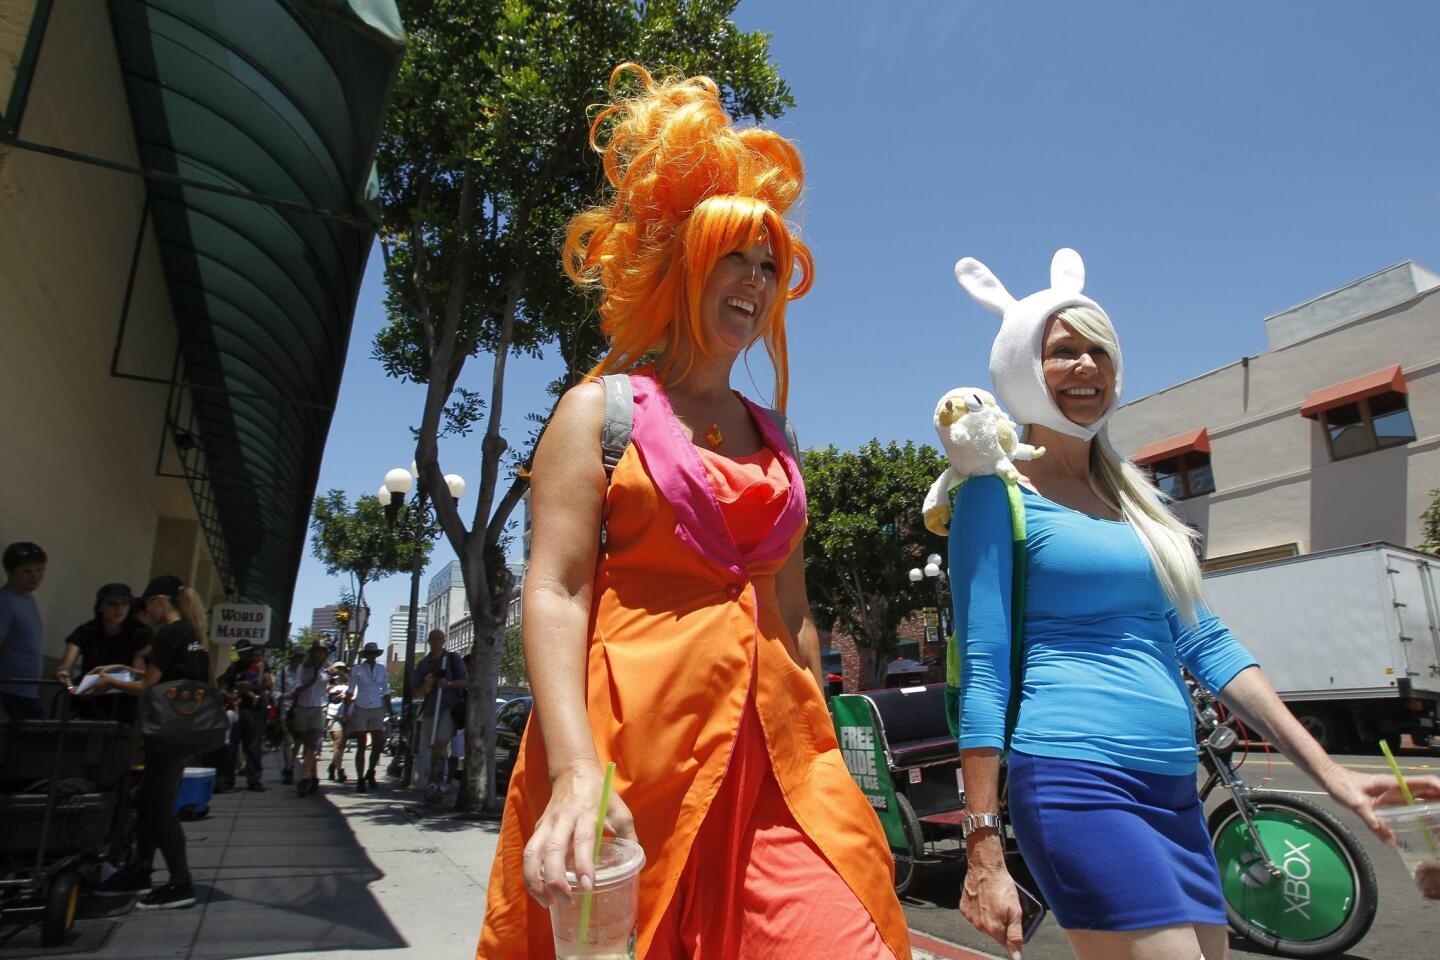 Paula Thomas, left, and Kat Bingaman are dressed as Fiona and the Flame Princess, characters from the Cartoon Network's Adventure Time, as they walk down Fourth Avenue.